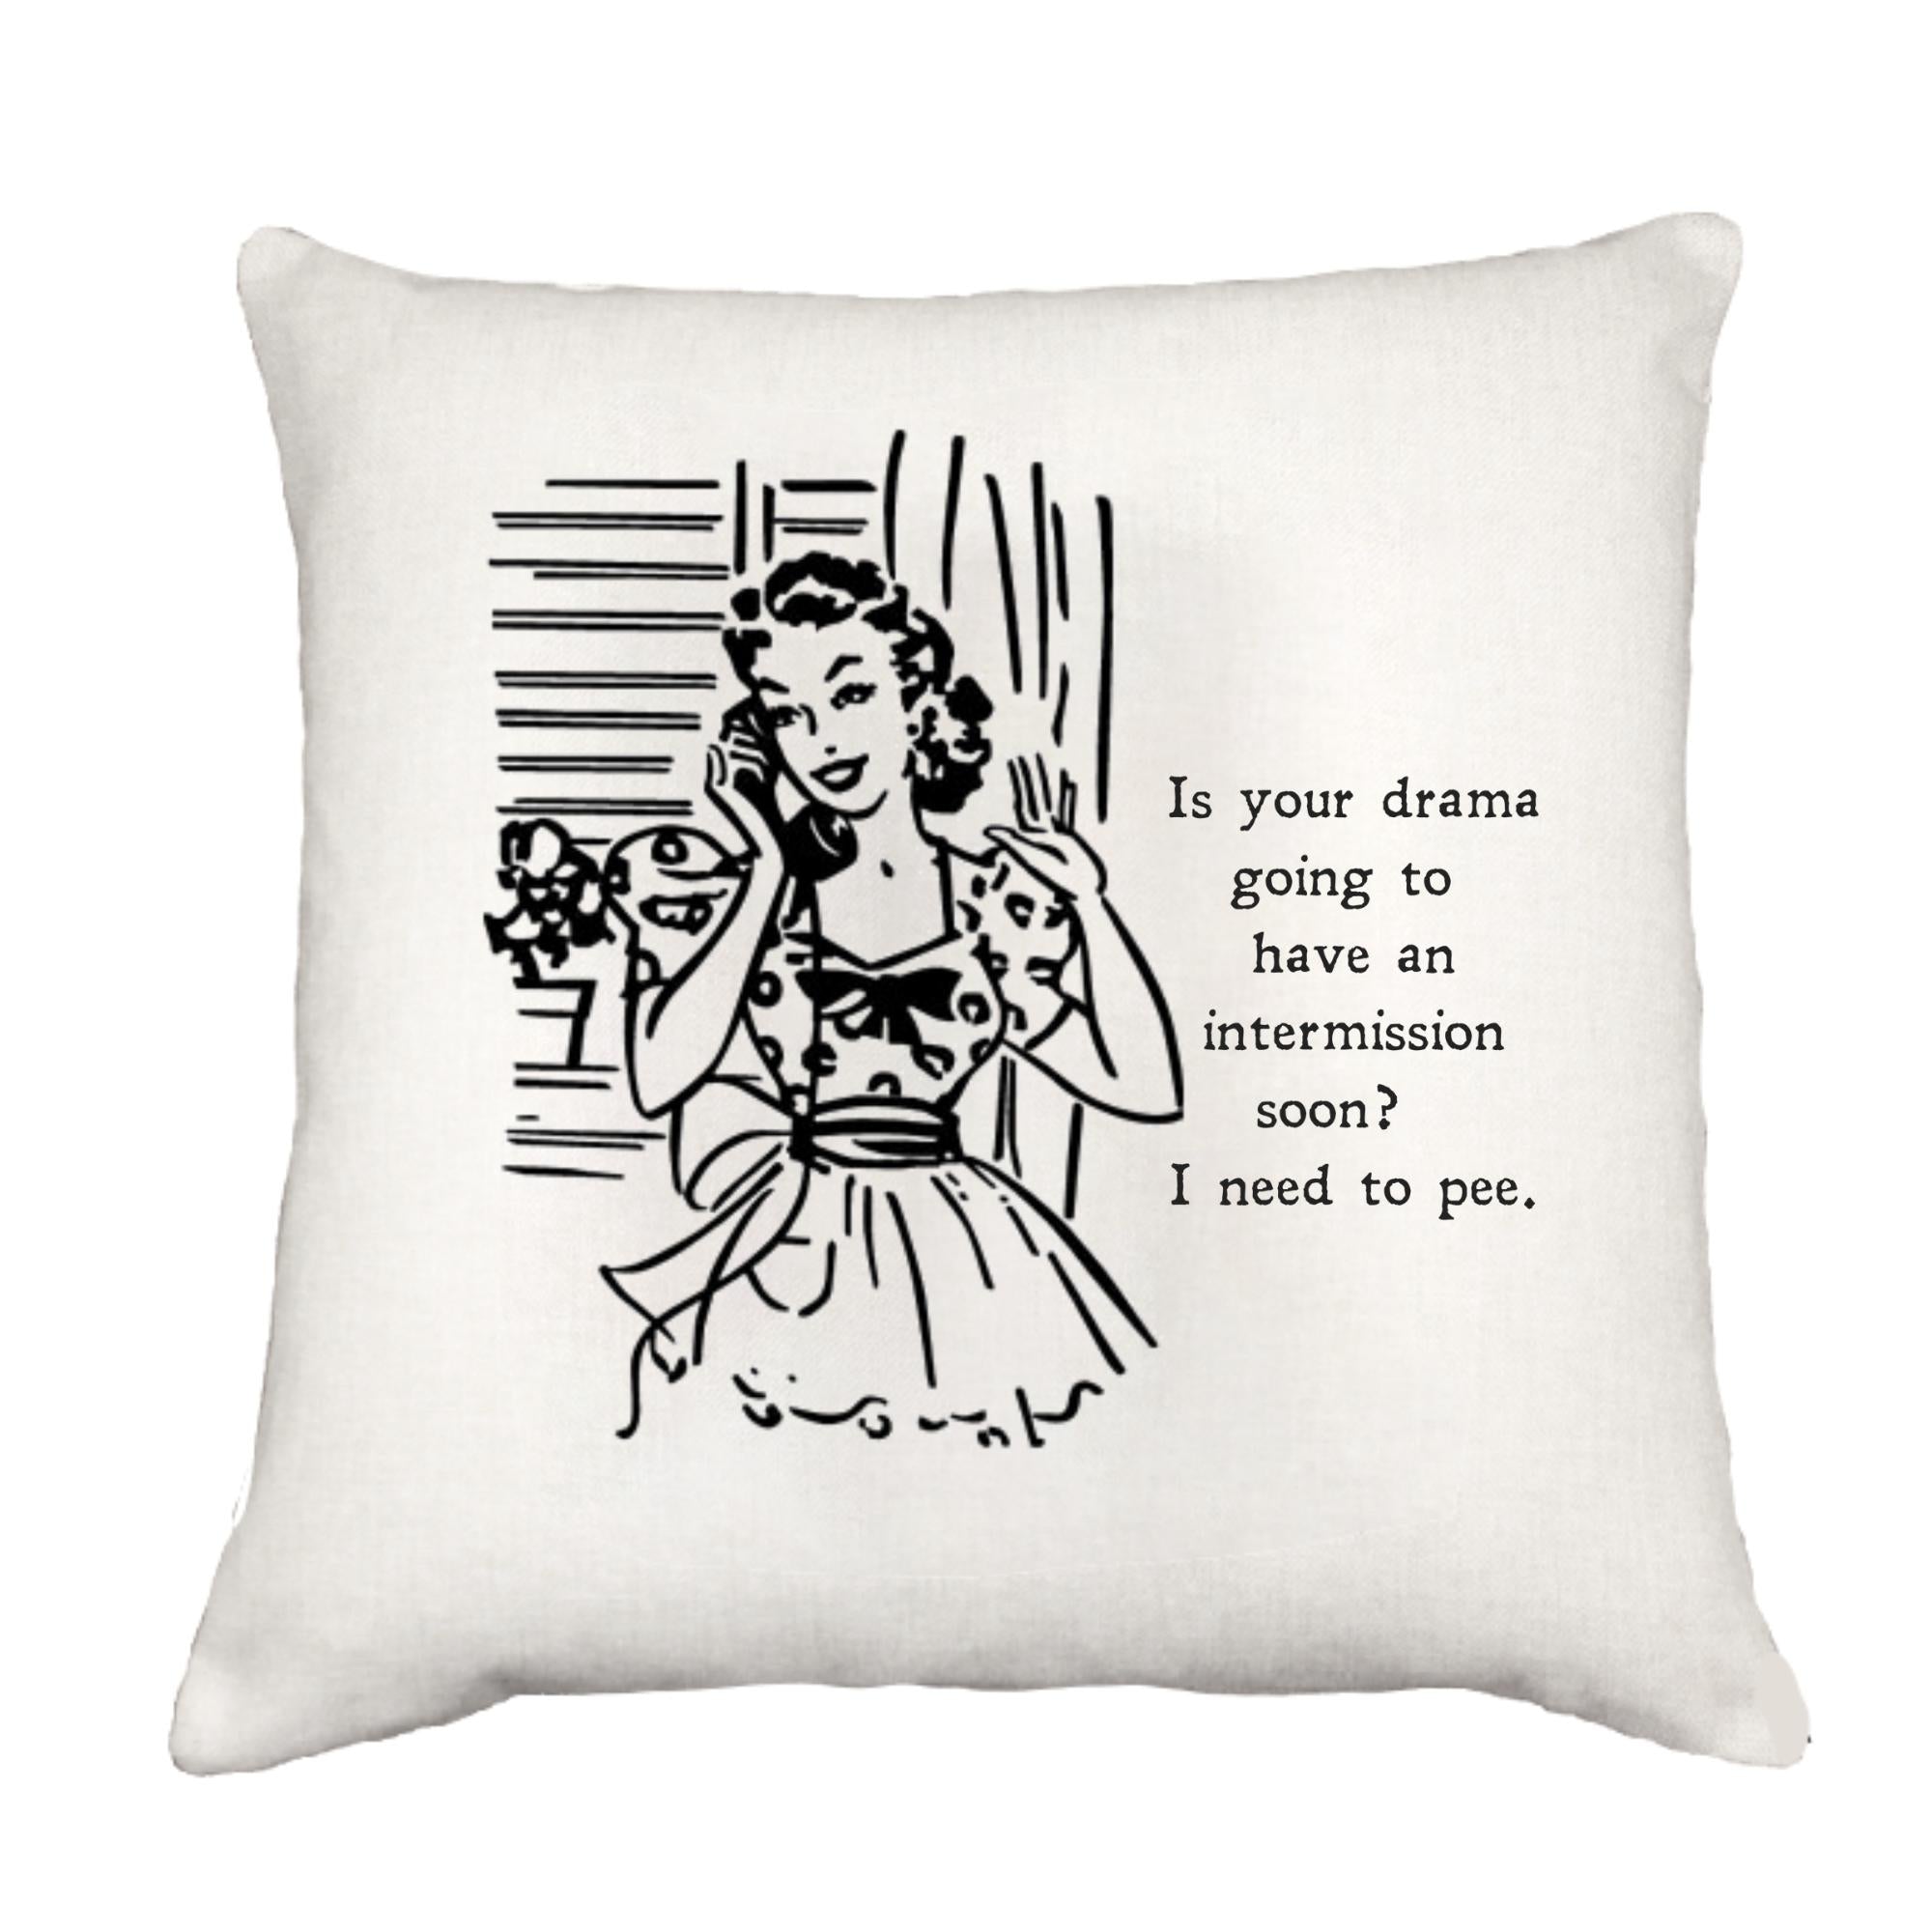 Drama Intermission Cottage Pillow Throw/Decorative Pillow - Southern Sisters